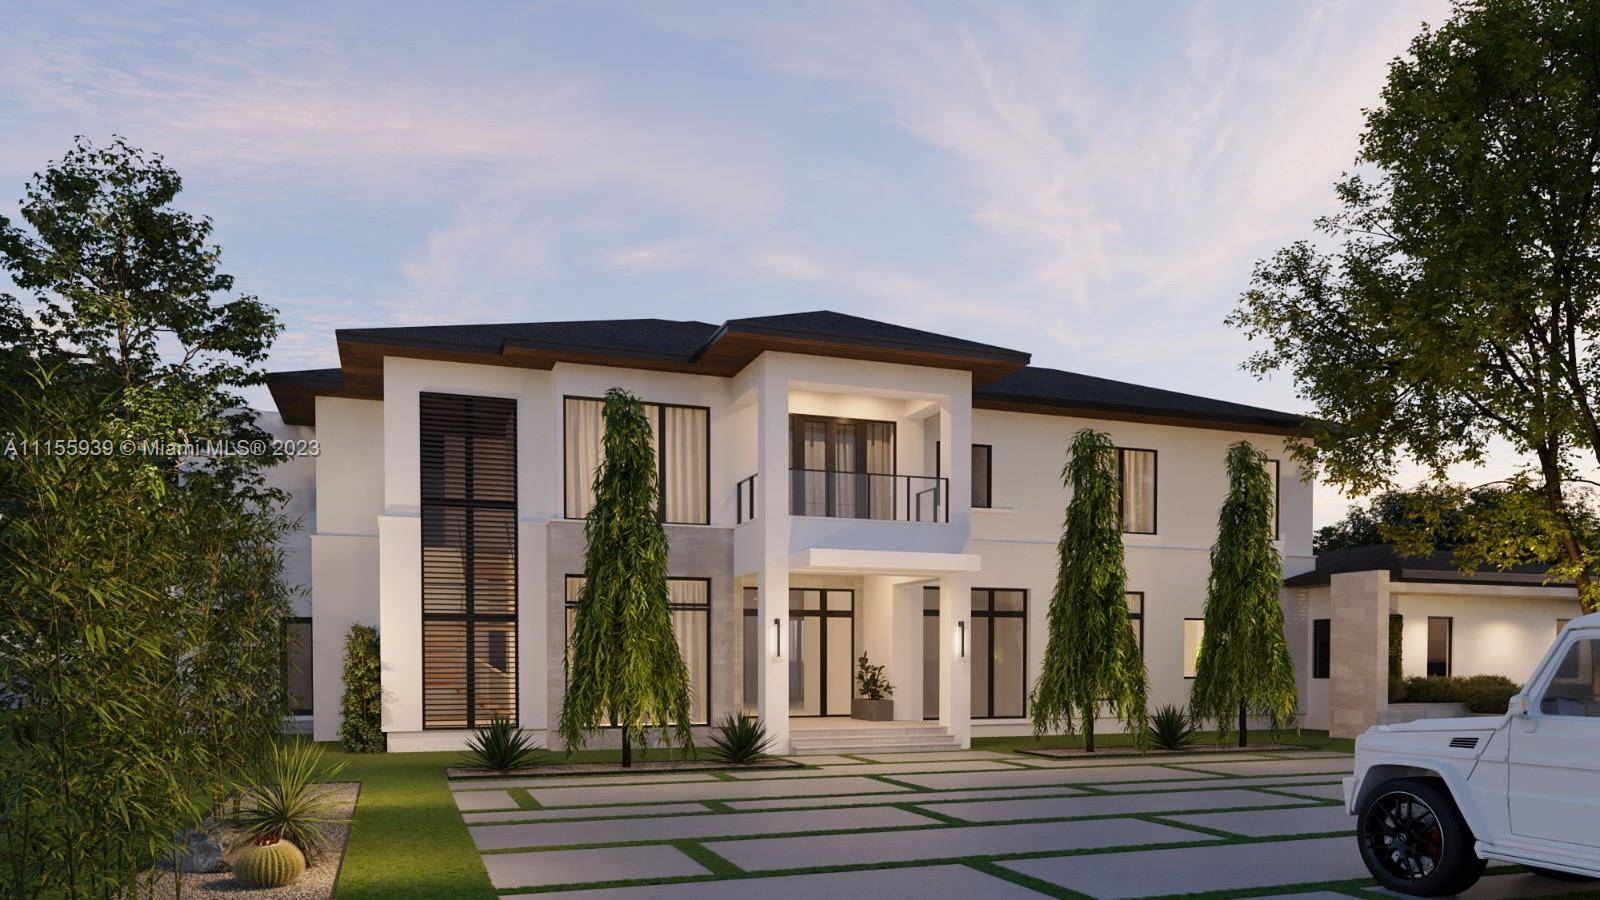 Turnkey Florida modern new construction by award winning Hollub Homes, on an idyllic Pinecrest street w a perfect blend of timeless sophistication and legendary quality completed JANUARY 2024.